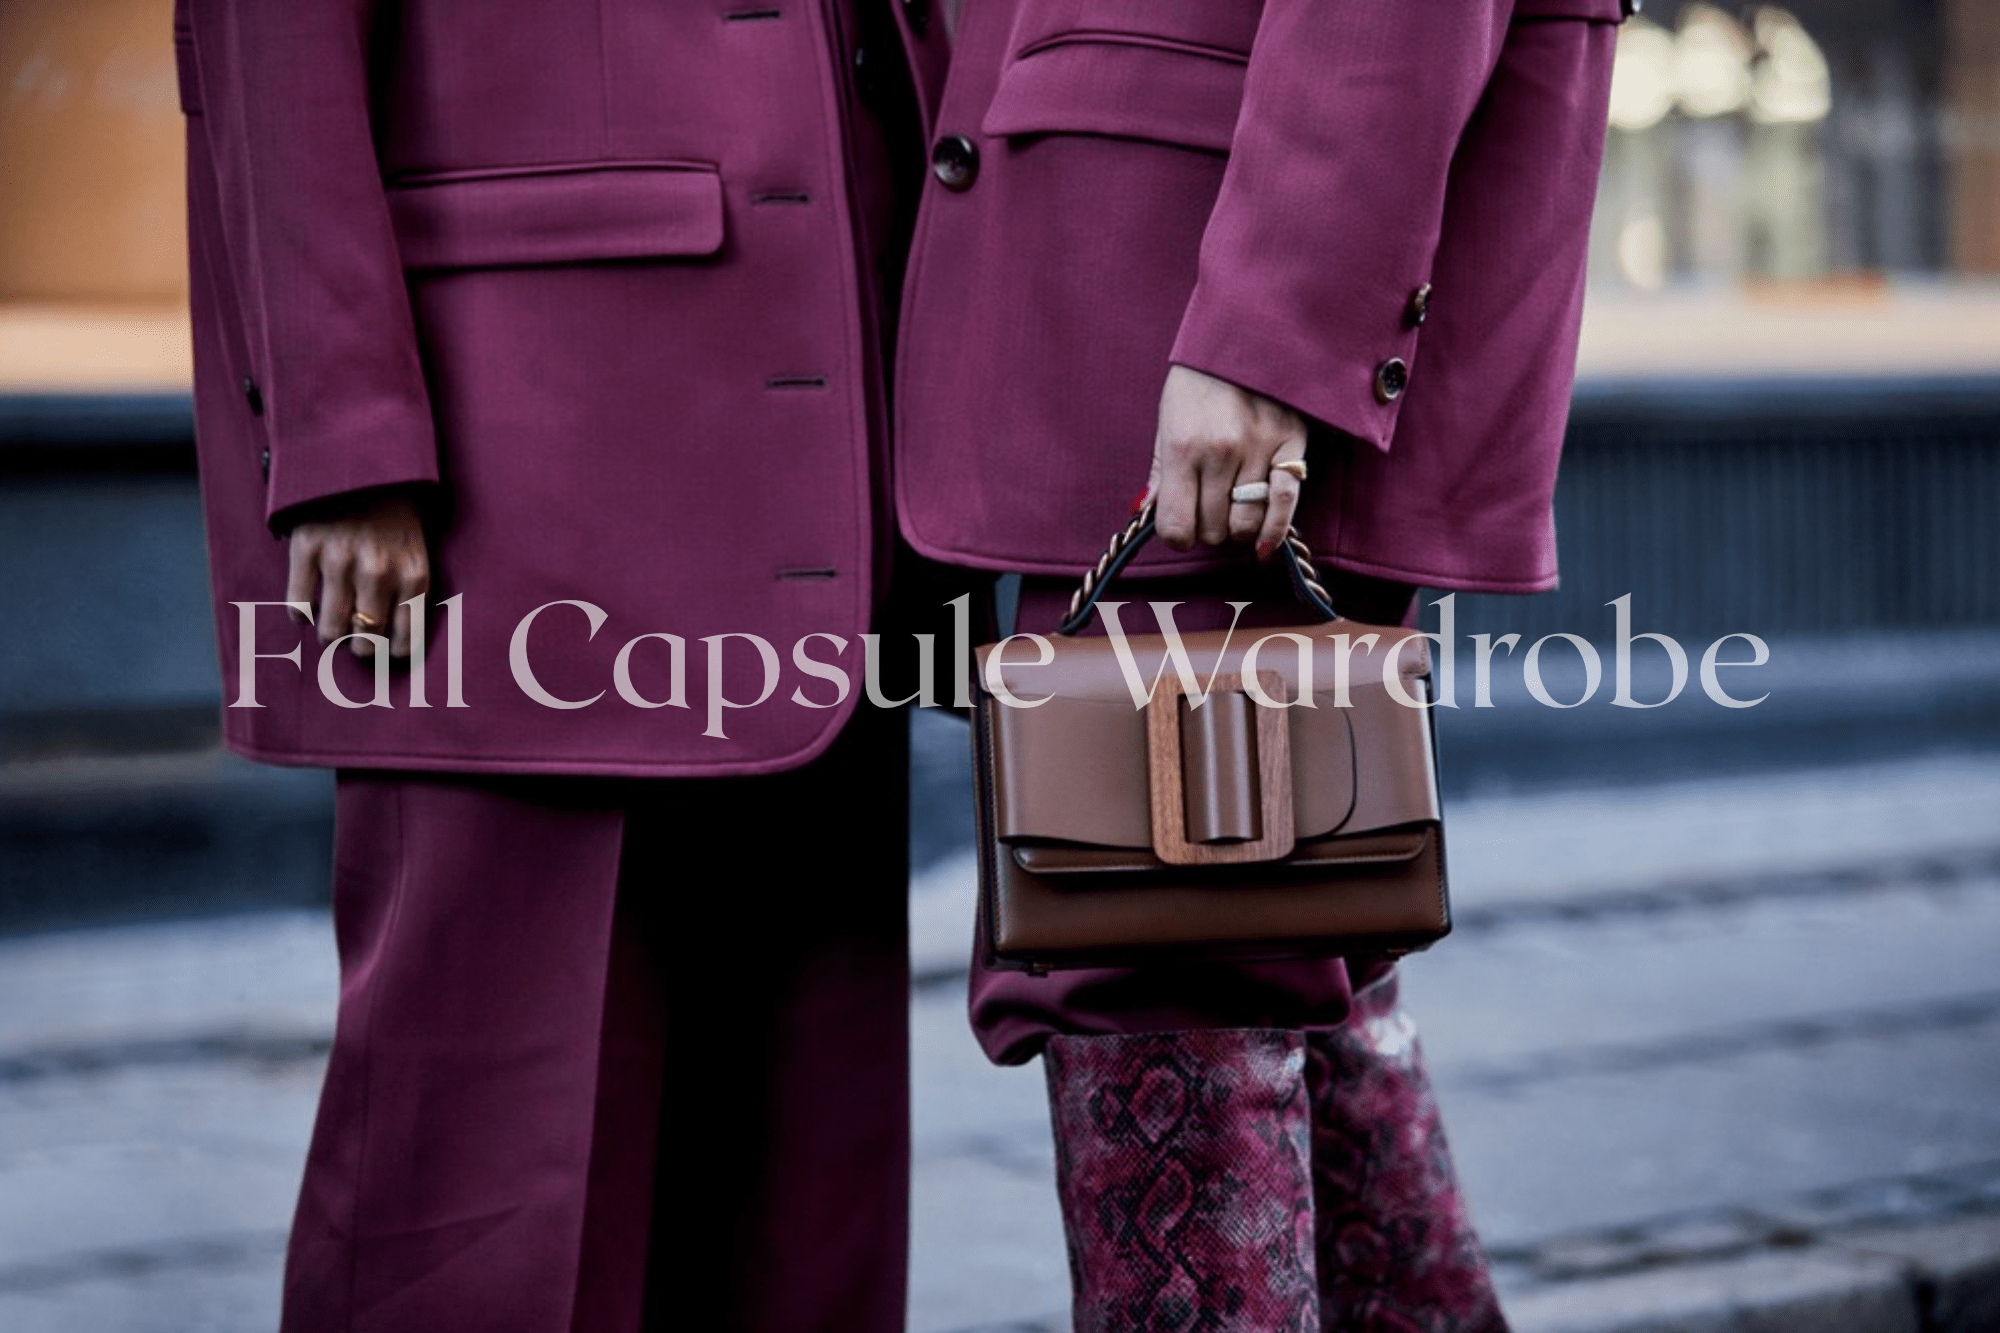 Fall Capsule Wardrobe: 5 Pieces You’ll Wear Forever